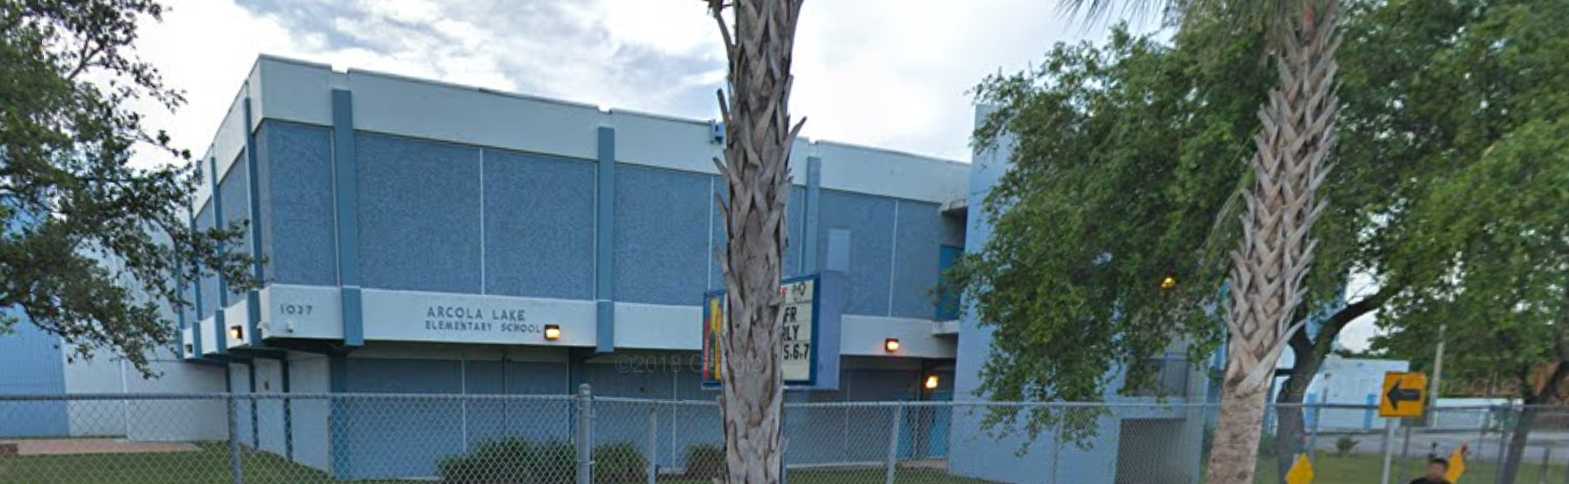 MDCPS-Arcola Lakes Elementary HS